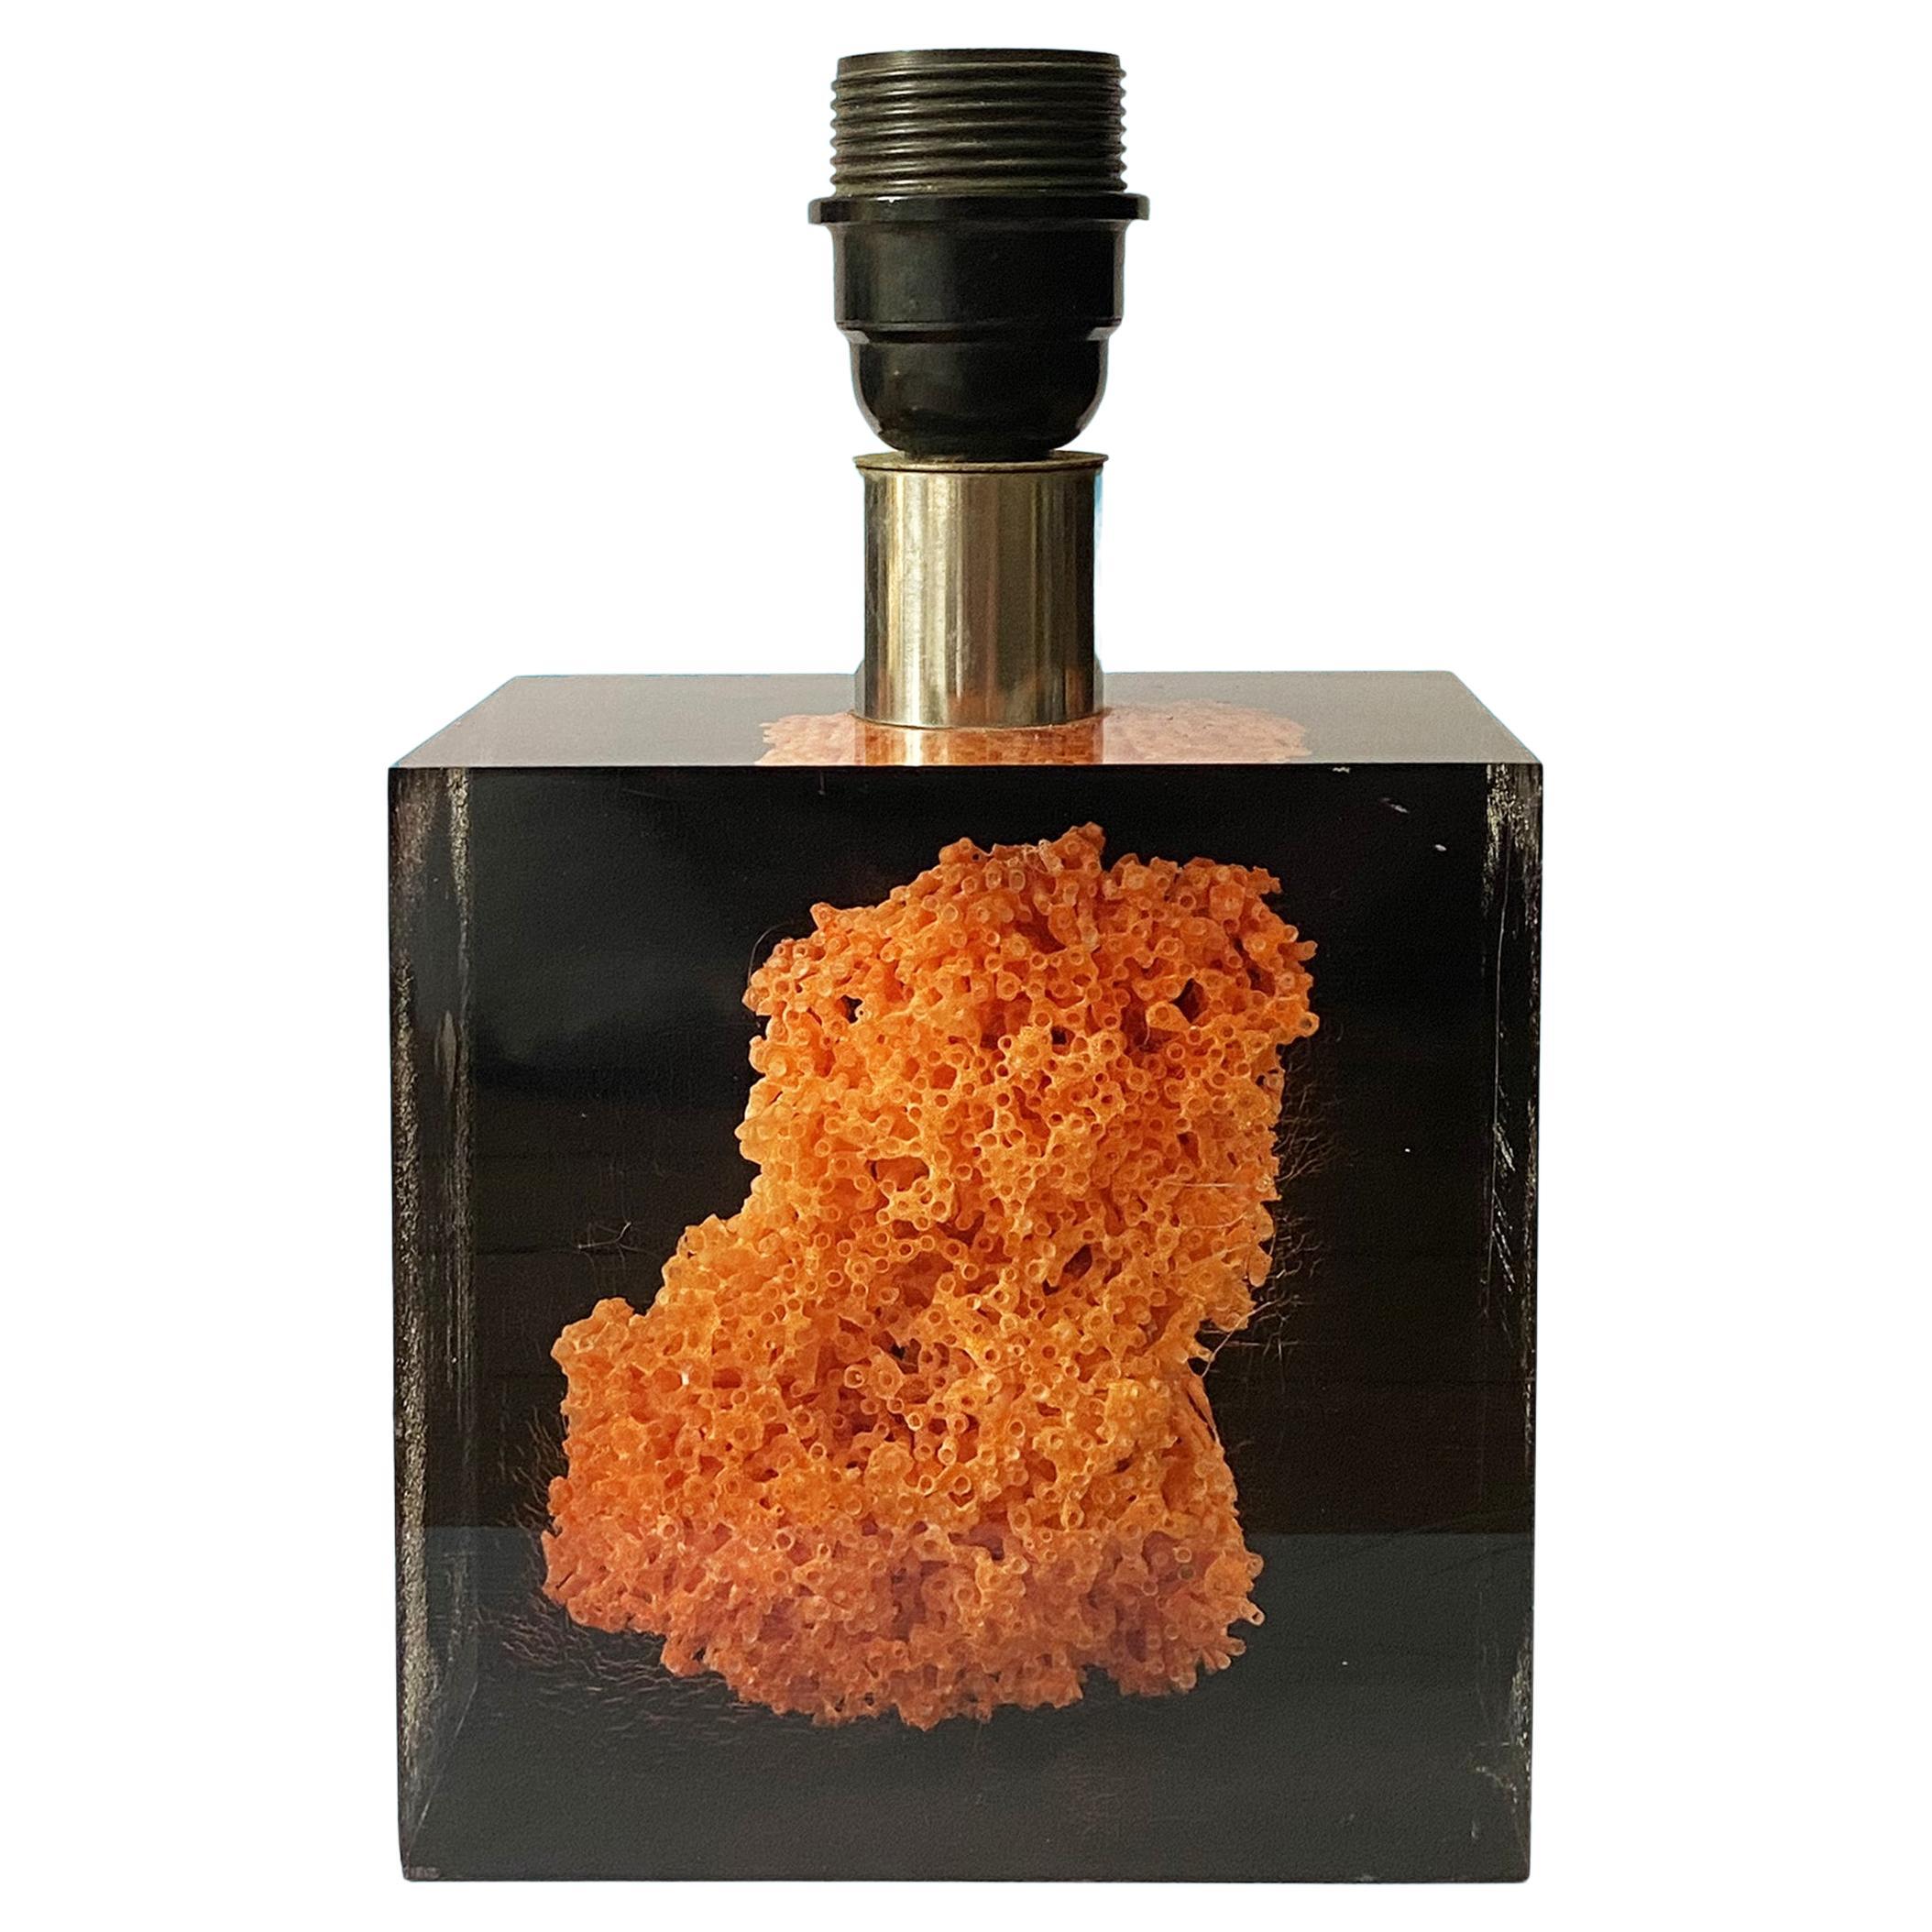 Acrylic Resin Cube with Coral Inclusion Table Lamp by Pierre Giraudon, 1970s.